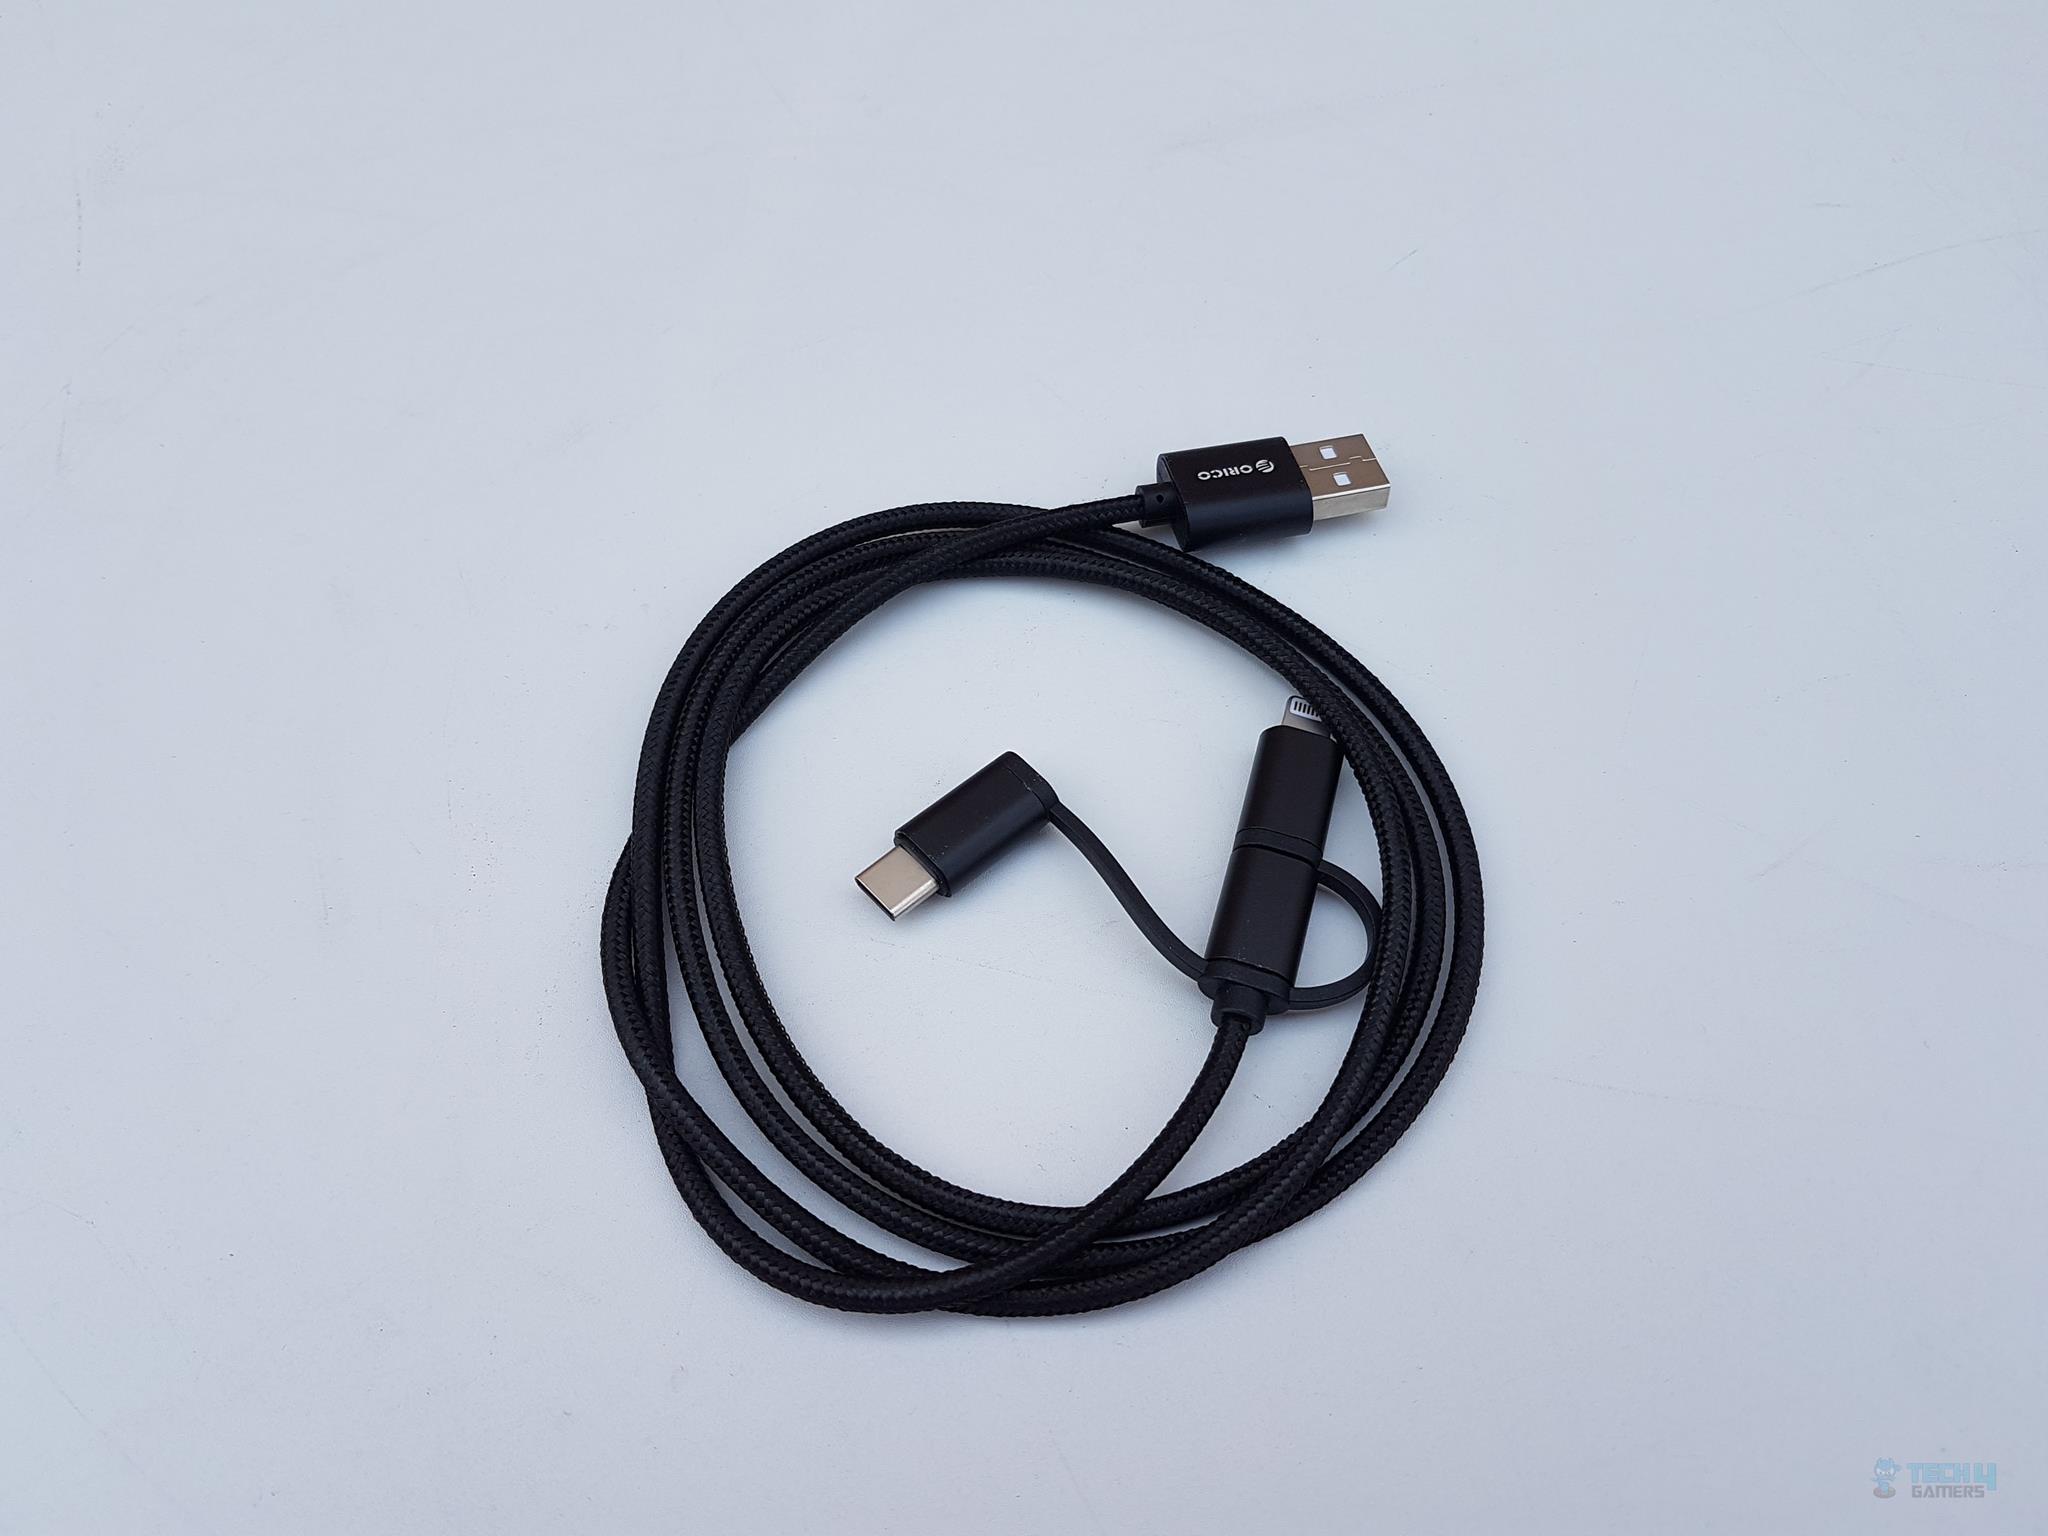 HT3-12-BK Cable Review Closer Look